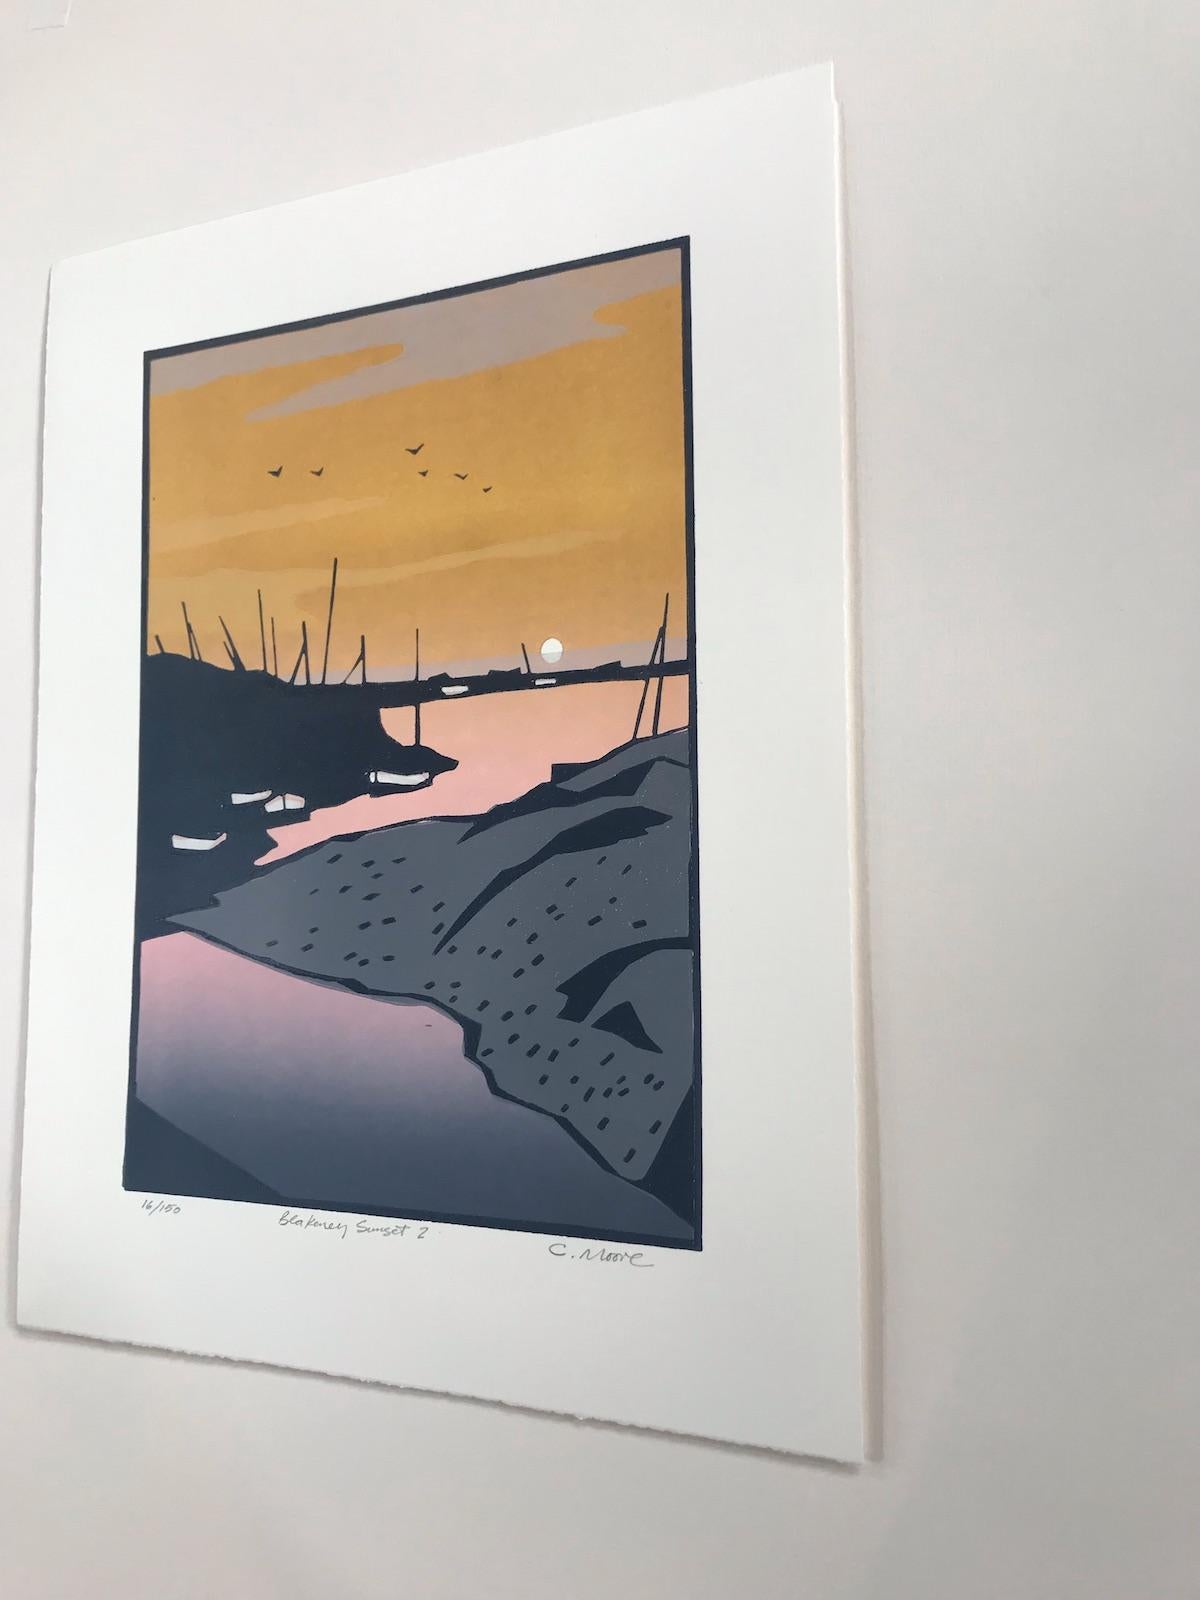 Blakeney Sunset 2 with Linocut Print on Paper by Colin Moore For Sale 3